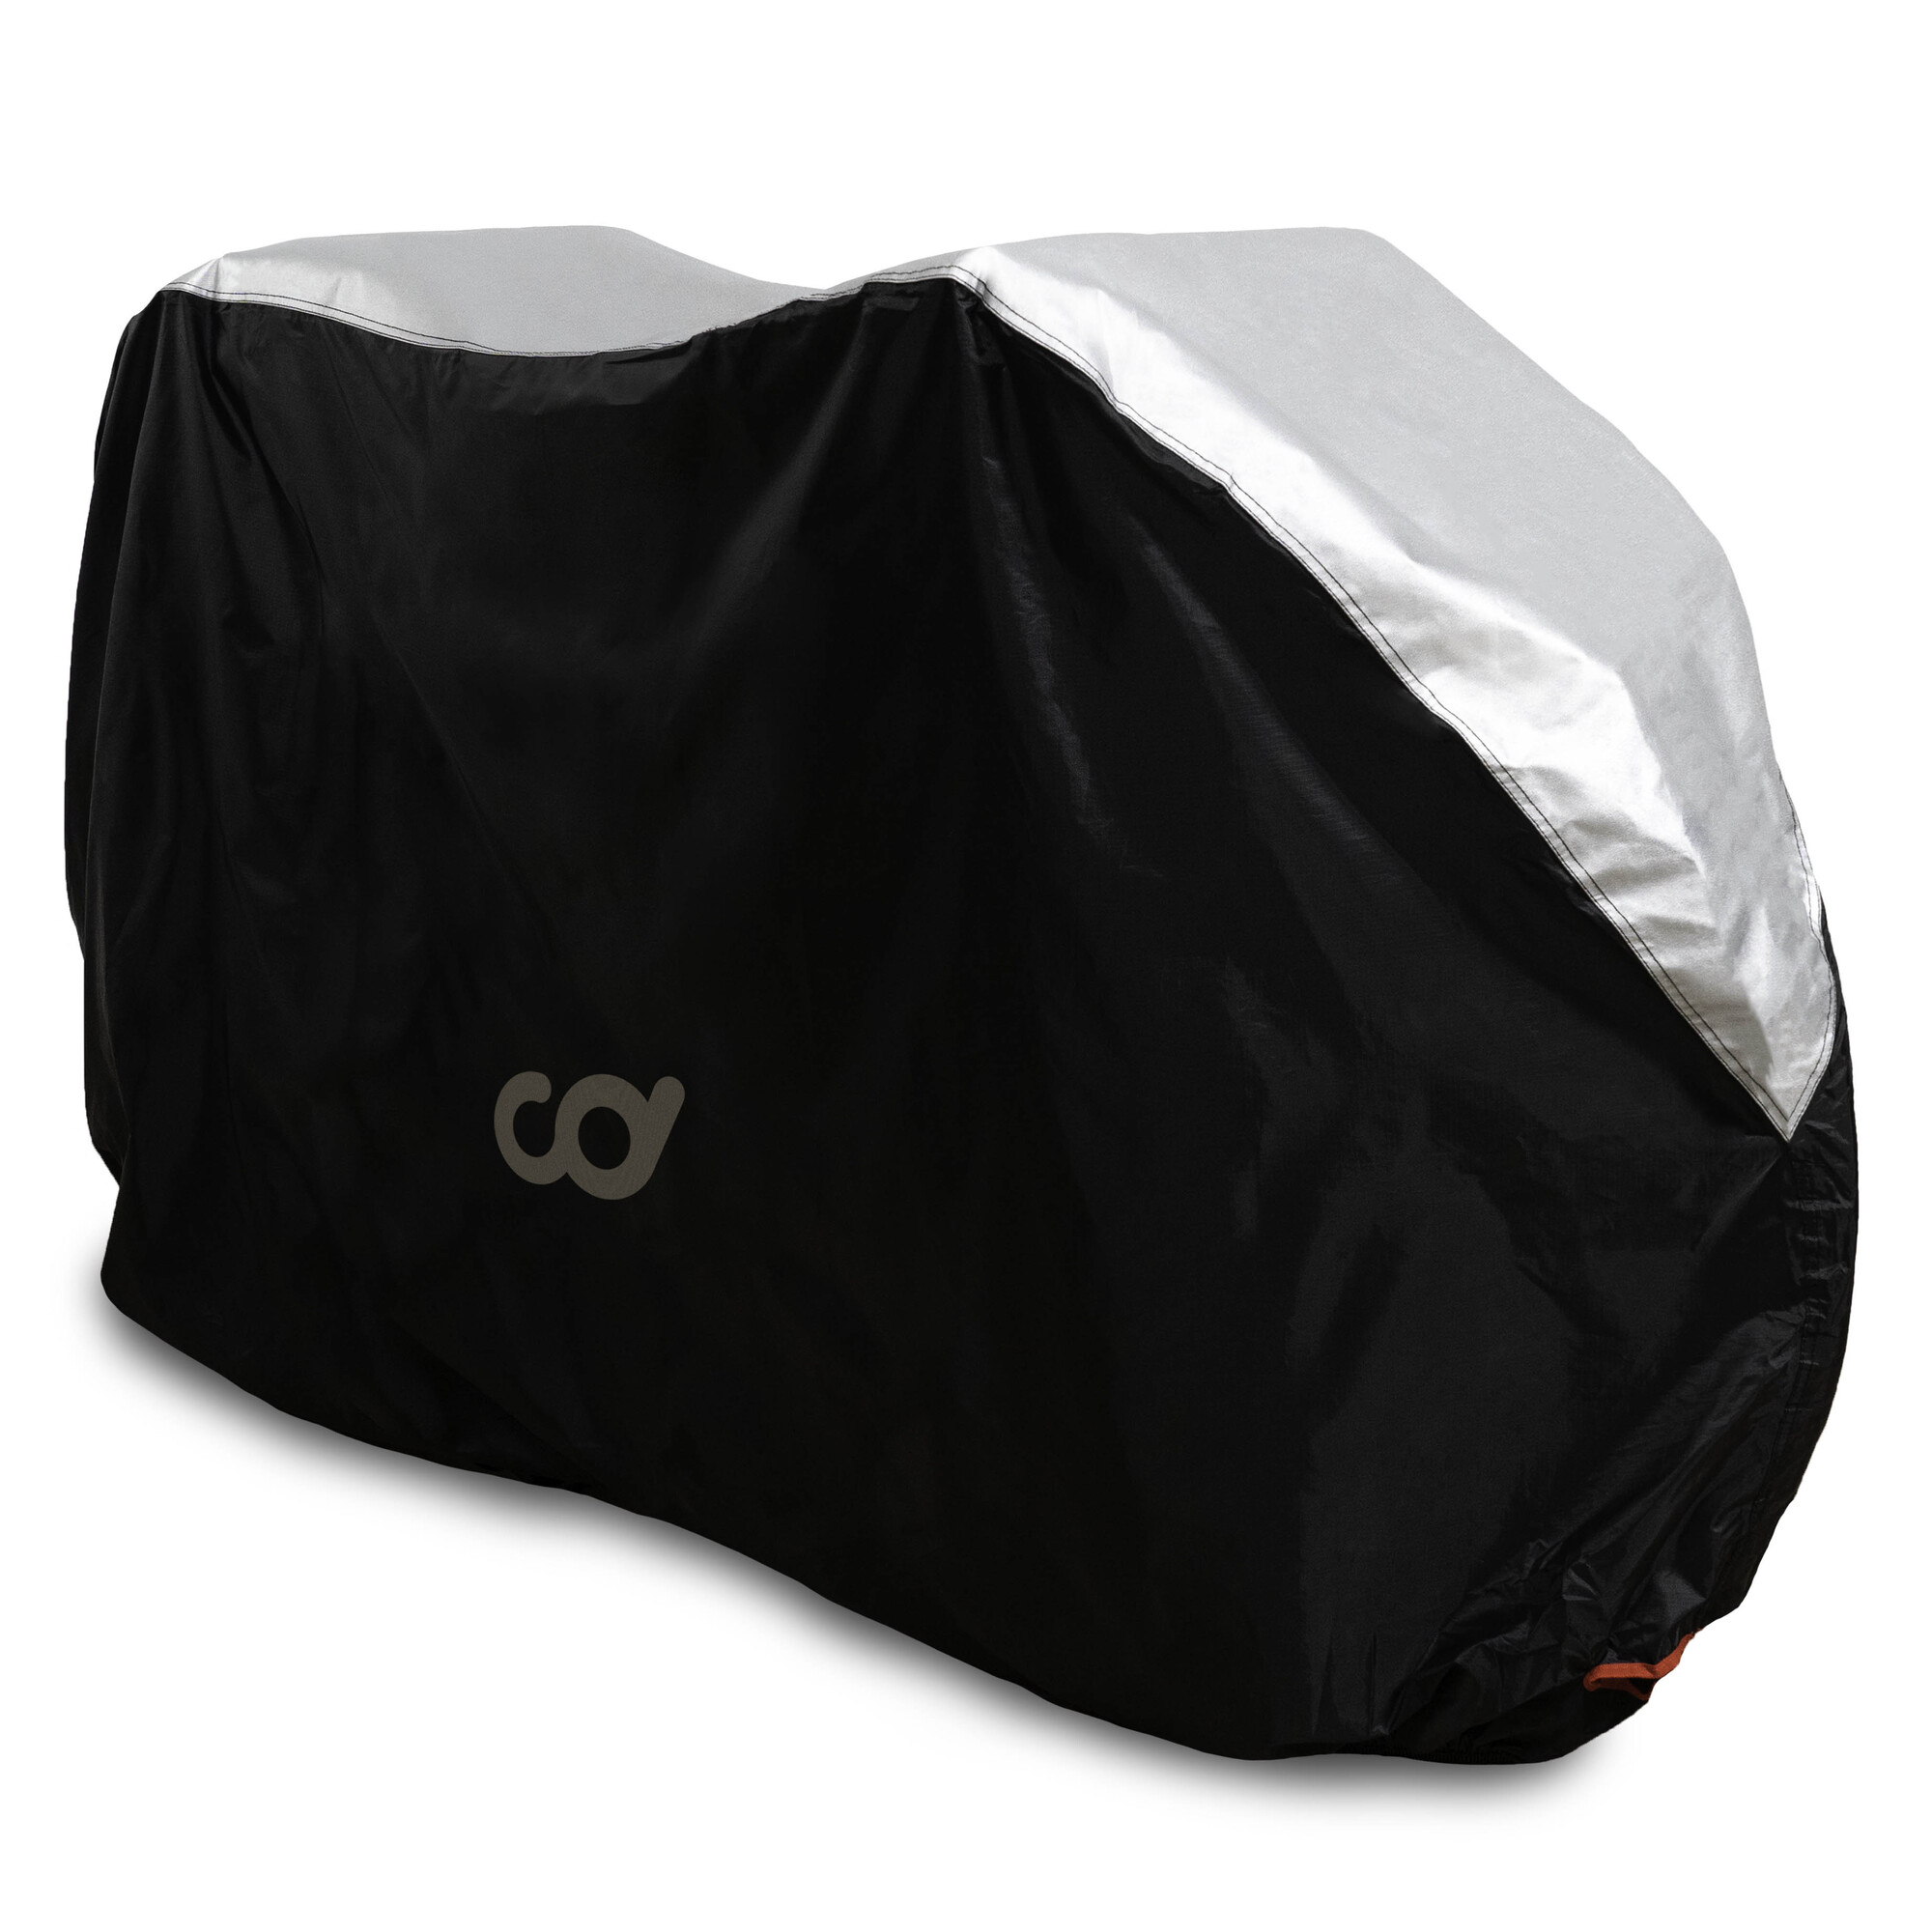 CD Bike Cover for Outdoor  Bicycle Storage -3 Bikes - Heavy Duty 190T Polyest Material, Waterproof Conditions for Mountain & Road Bikes